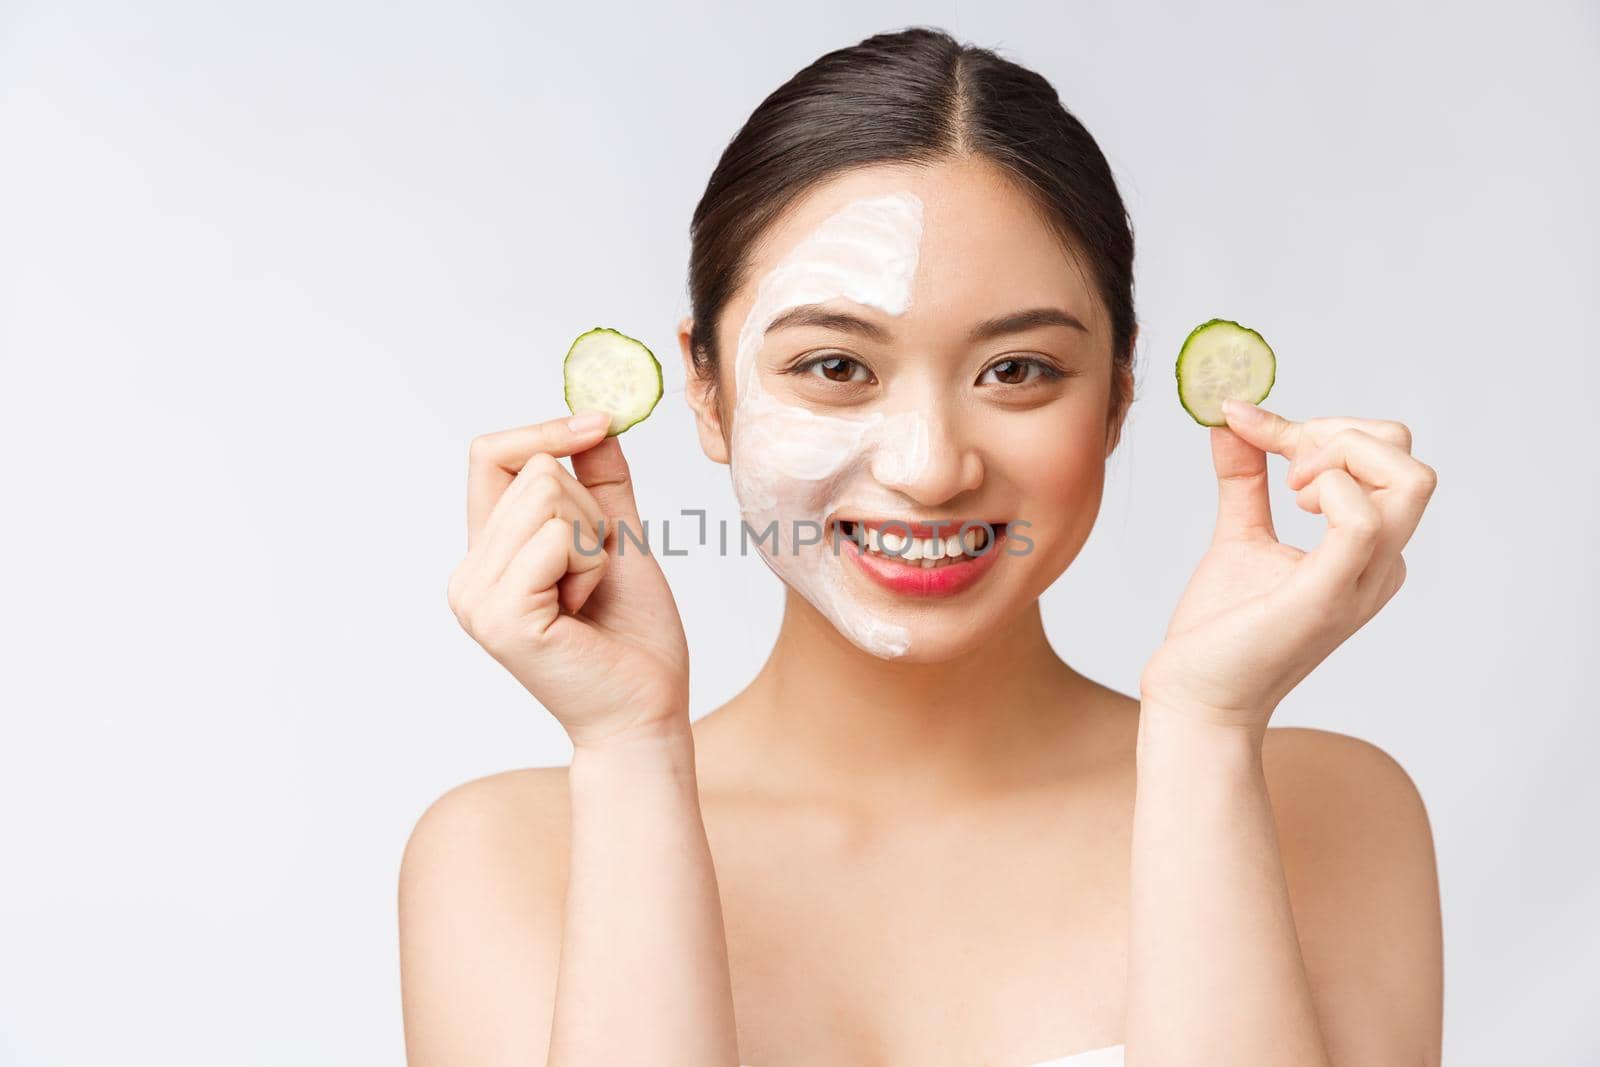 Beauty young asian women skin care image with cucumber on white background studio.